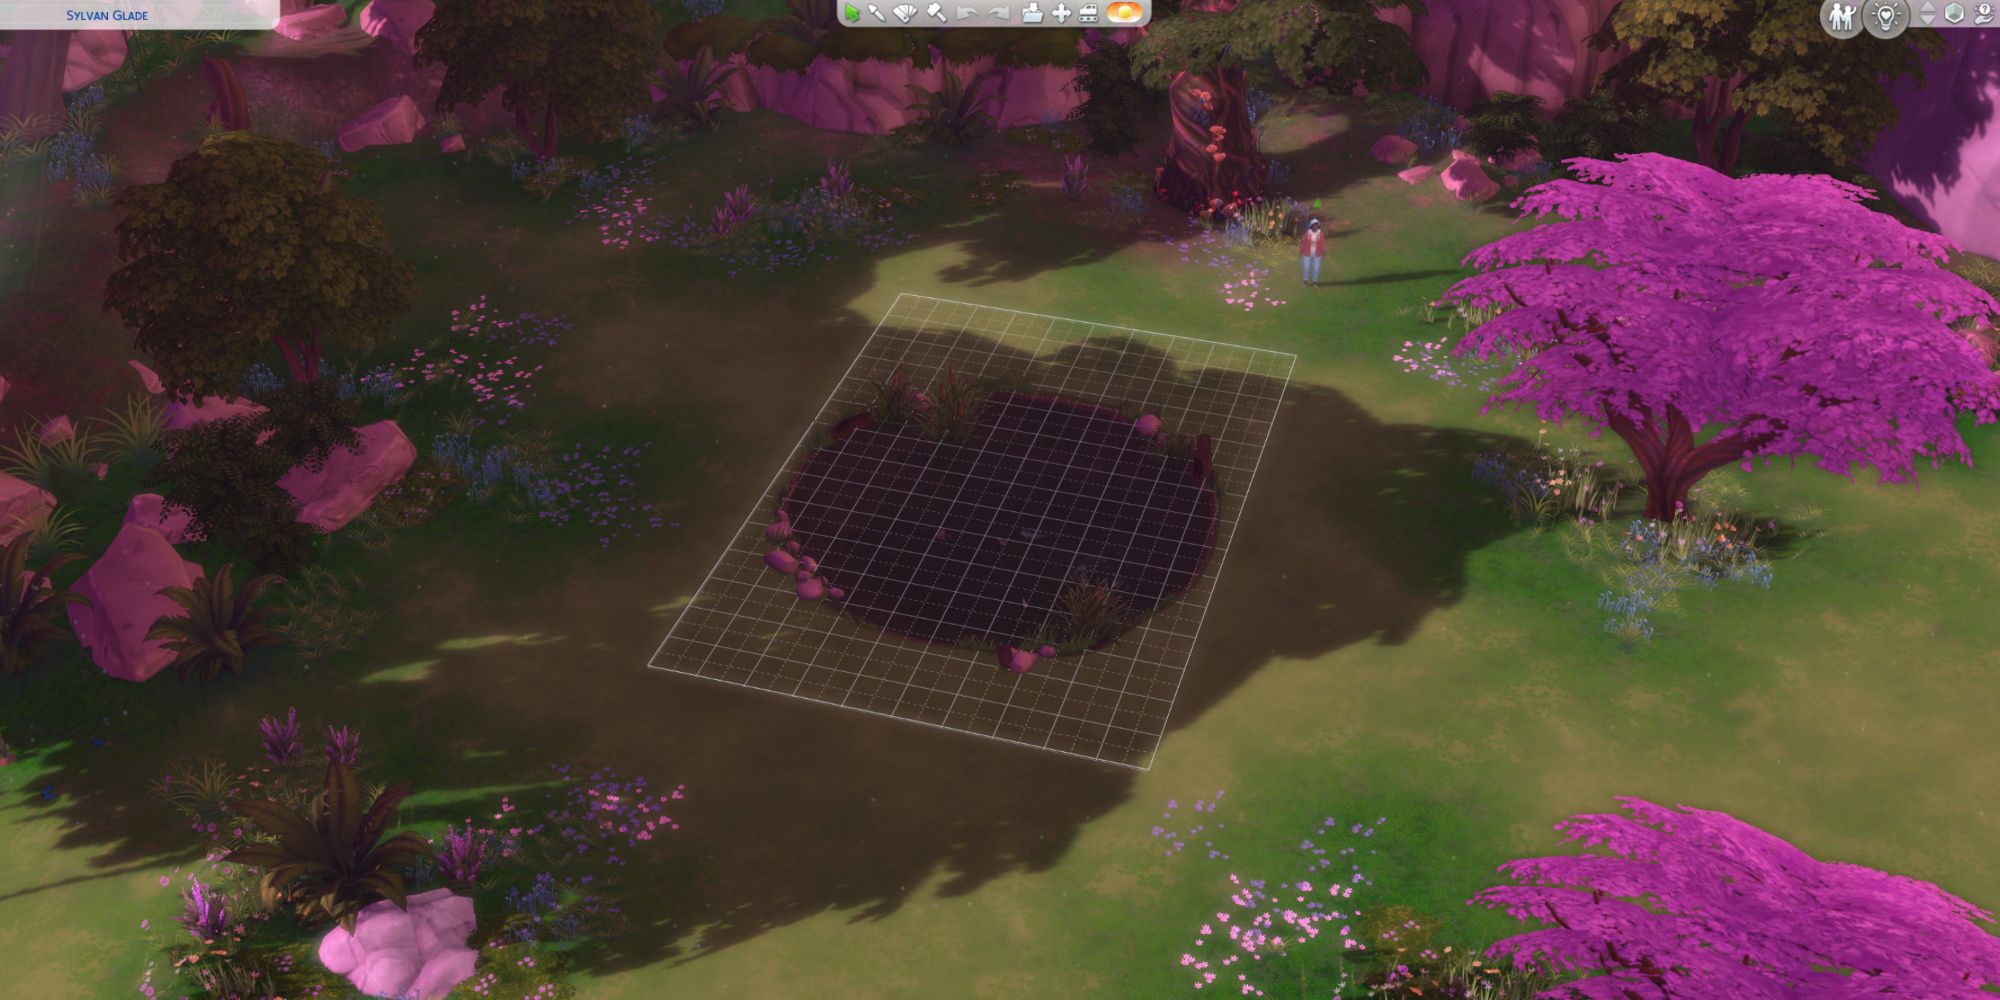 Sylvan Glade with freebuild enabled in The Sims 4